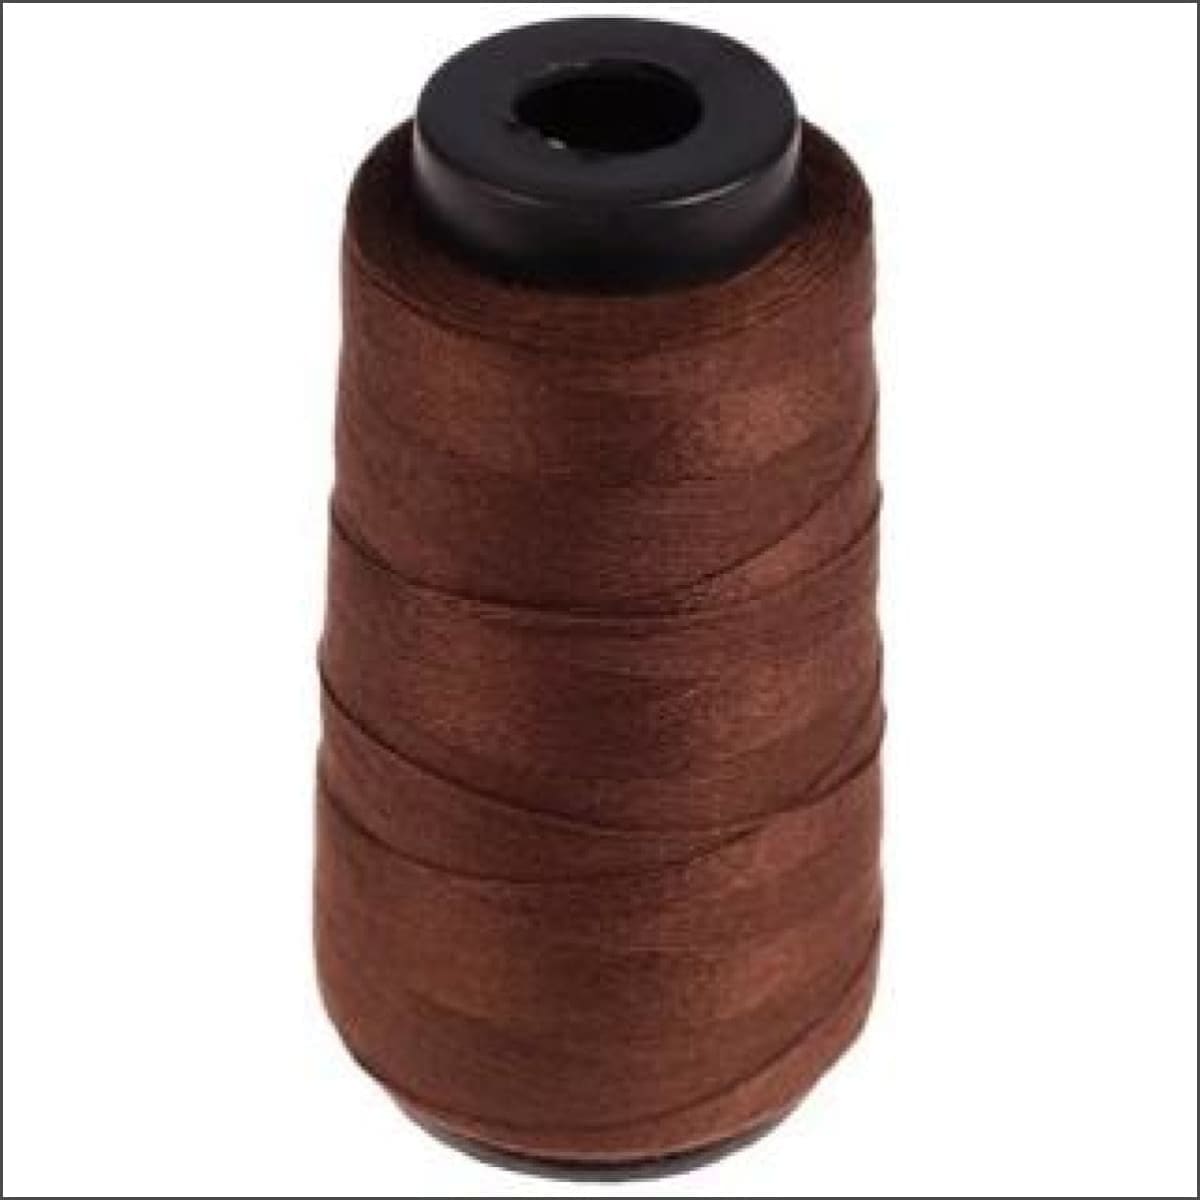 Sewing Weaving Thread- 400m Length Sewing Weaving Thread Lqqks 400m Large Brown 